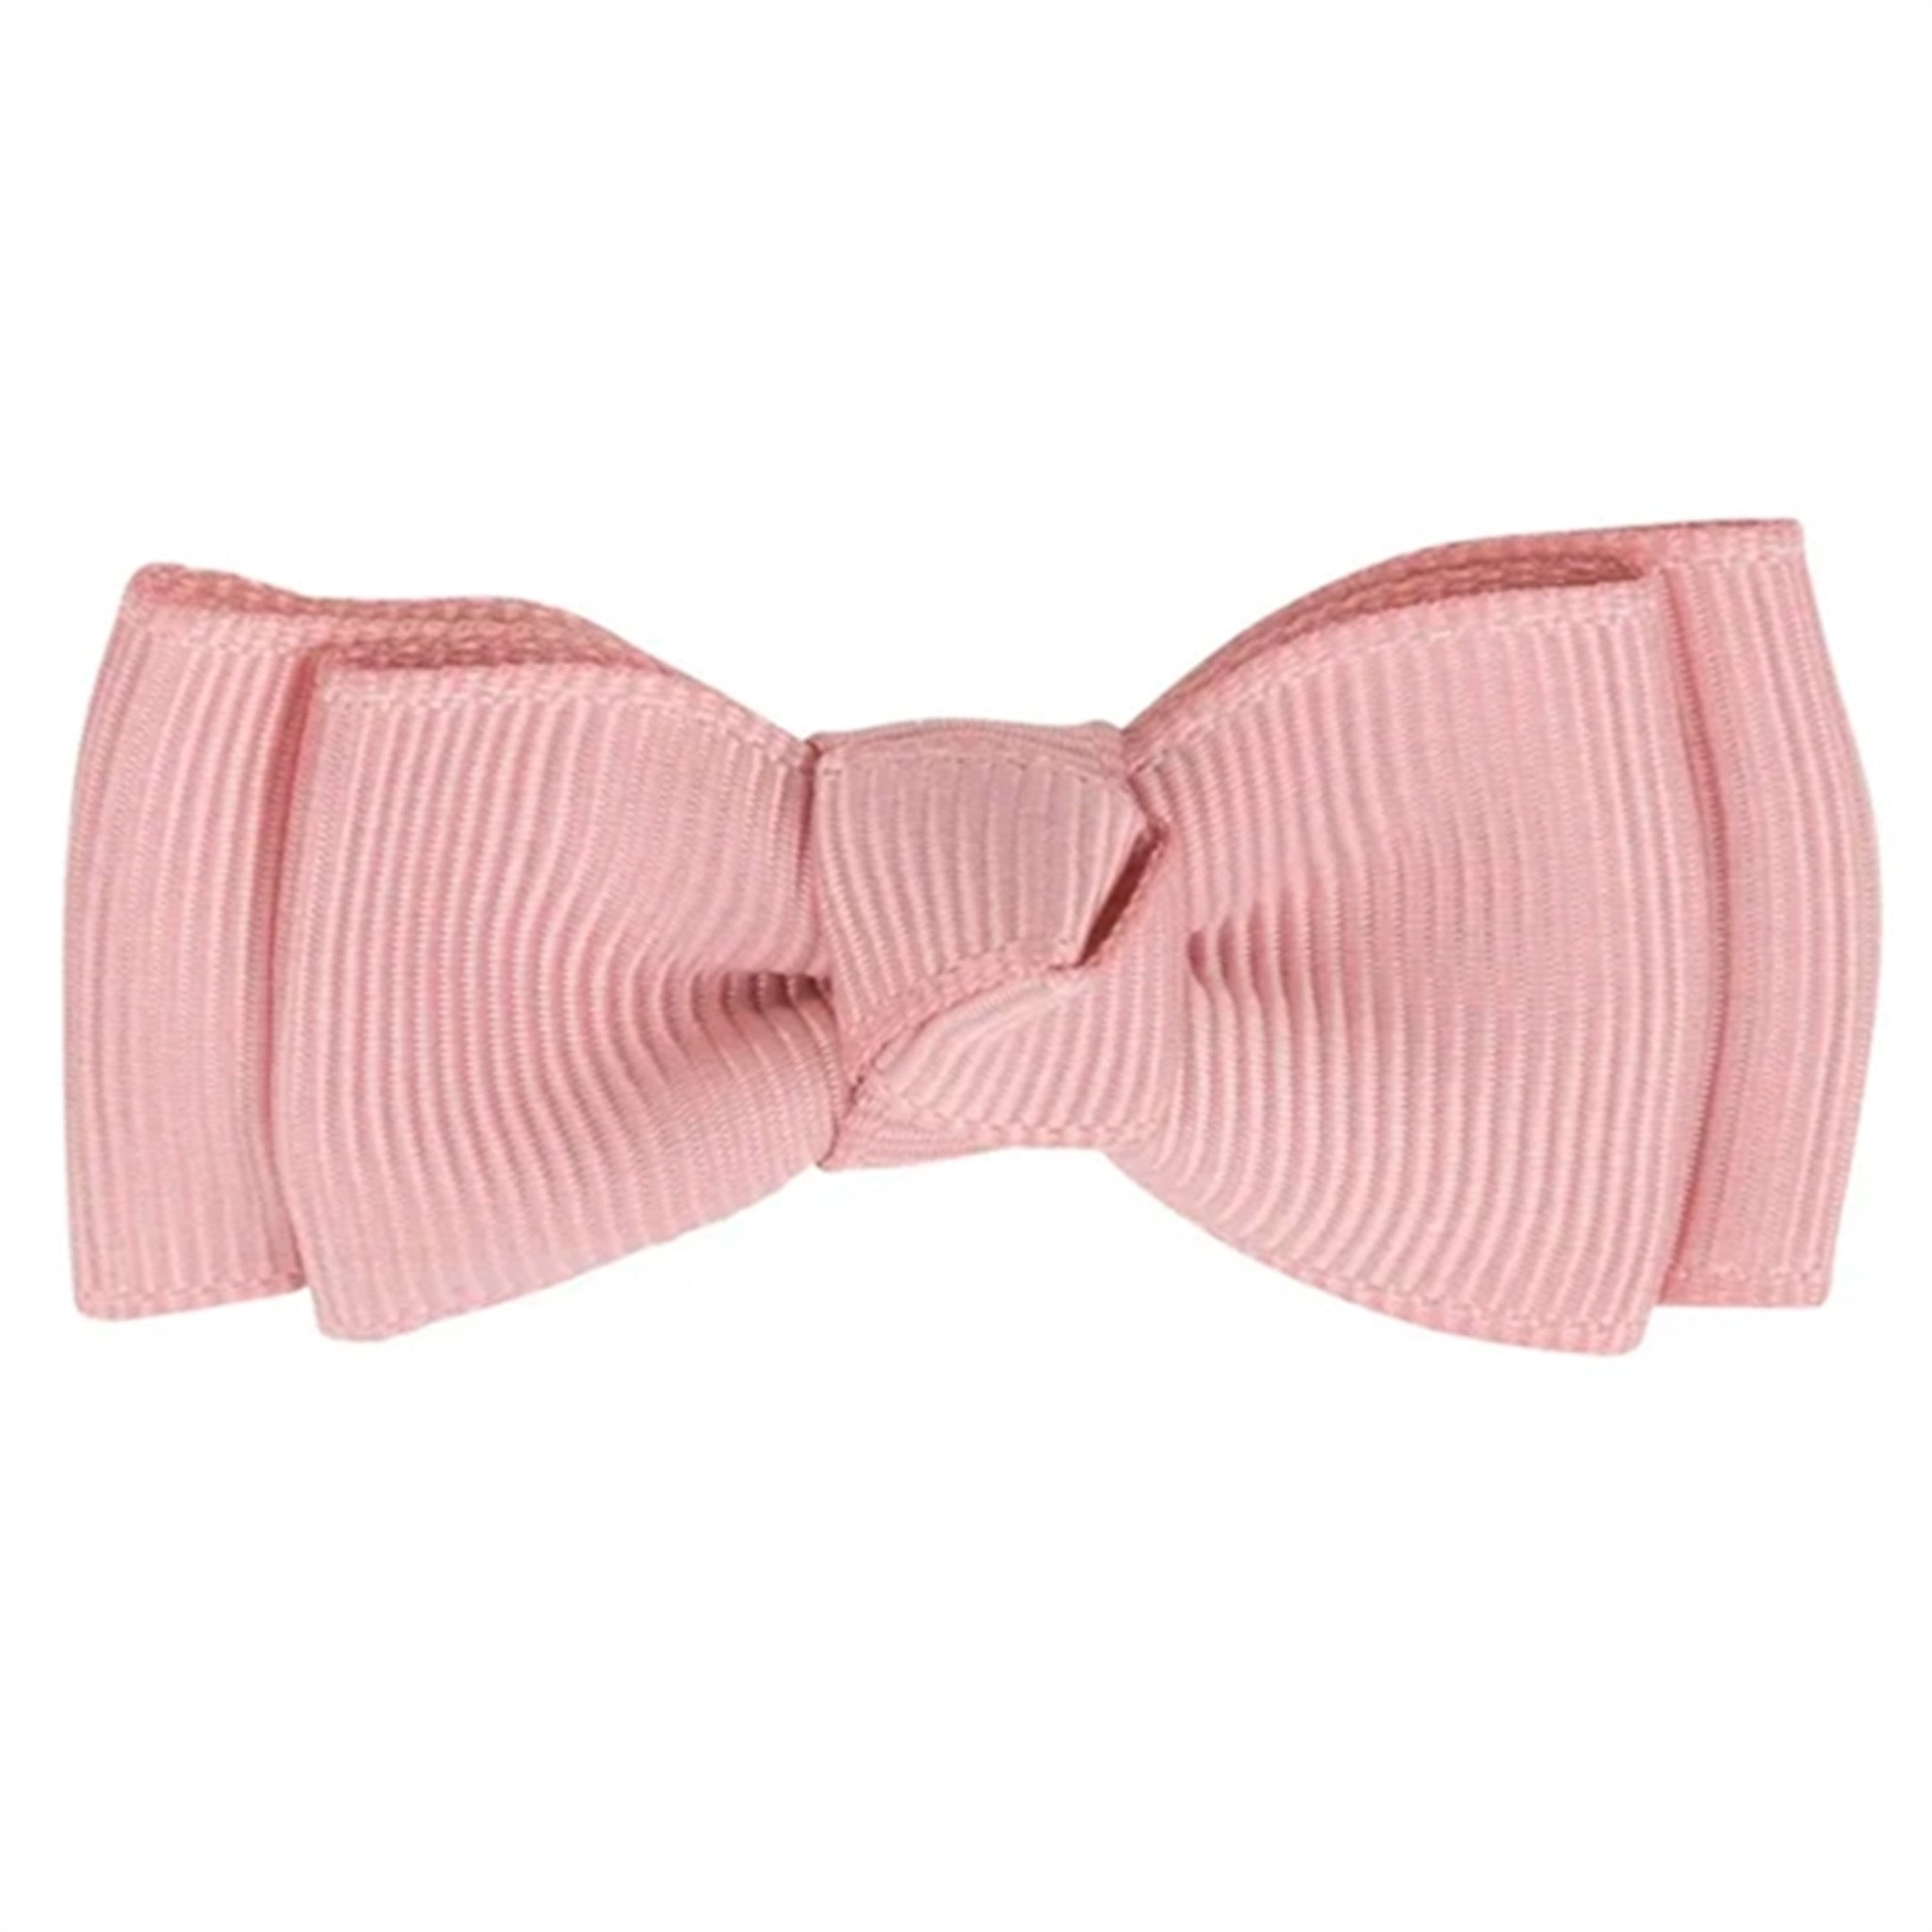 Bow's by Stær Double Bow (antique rose)